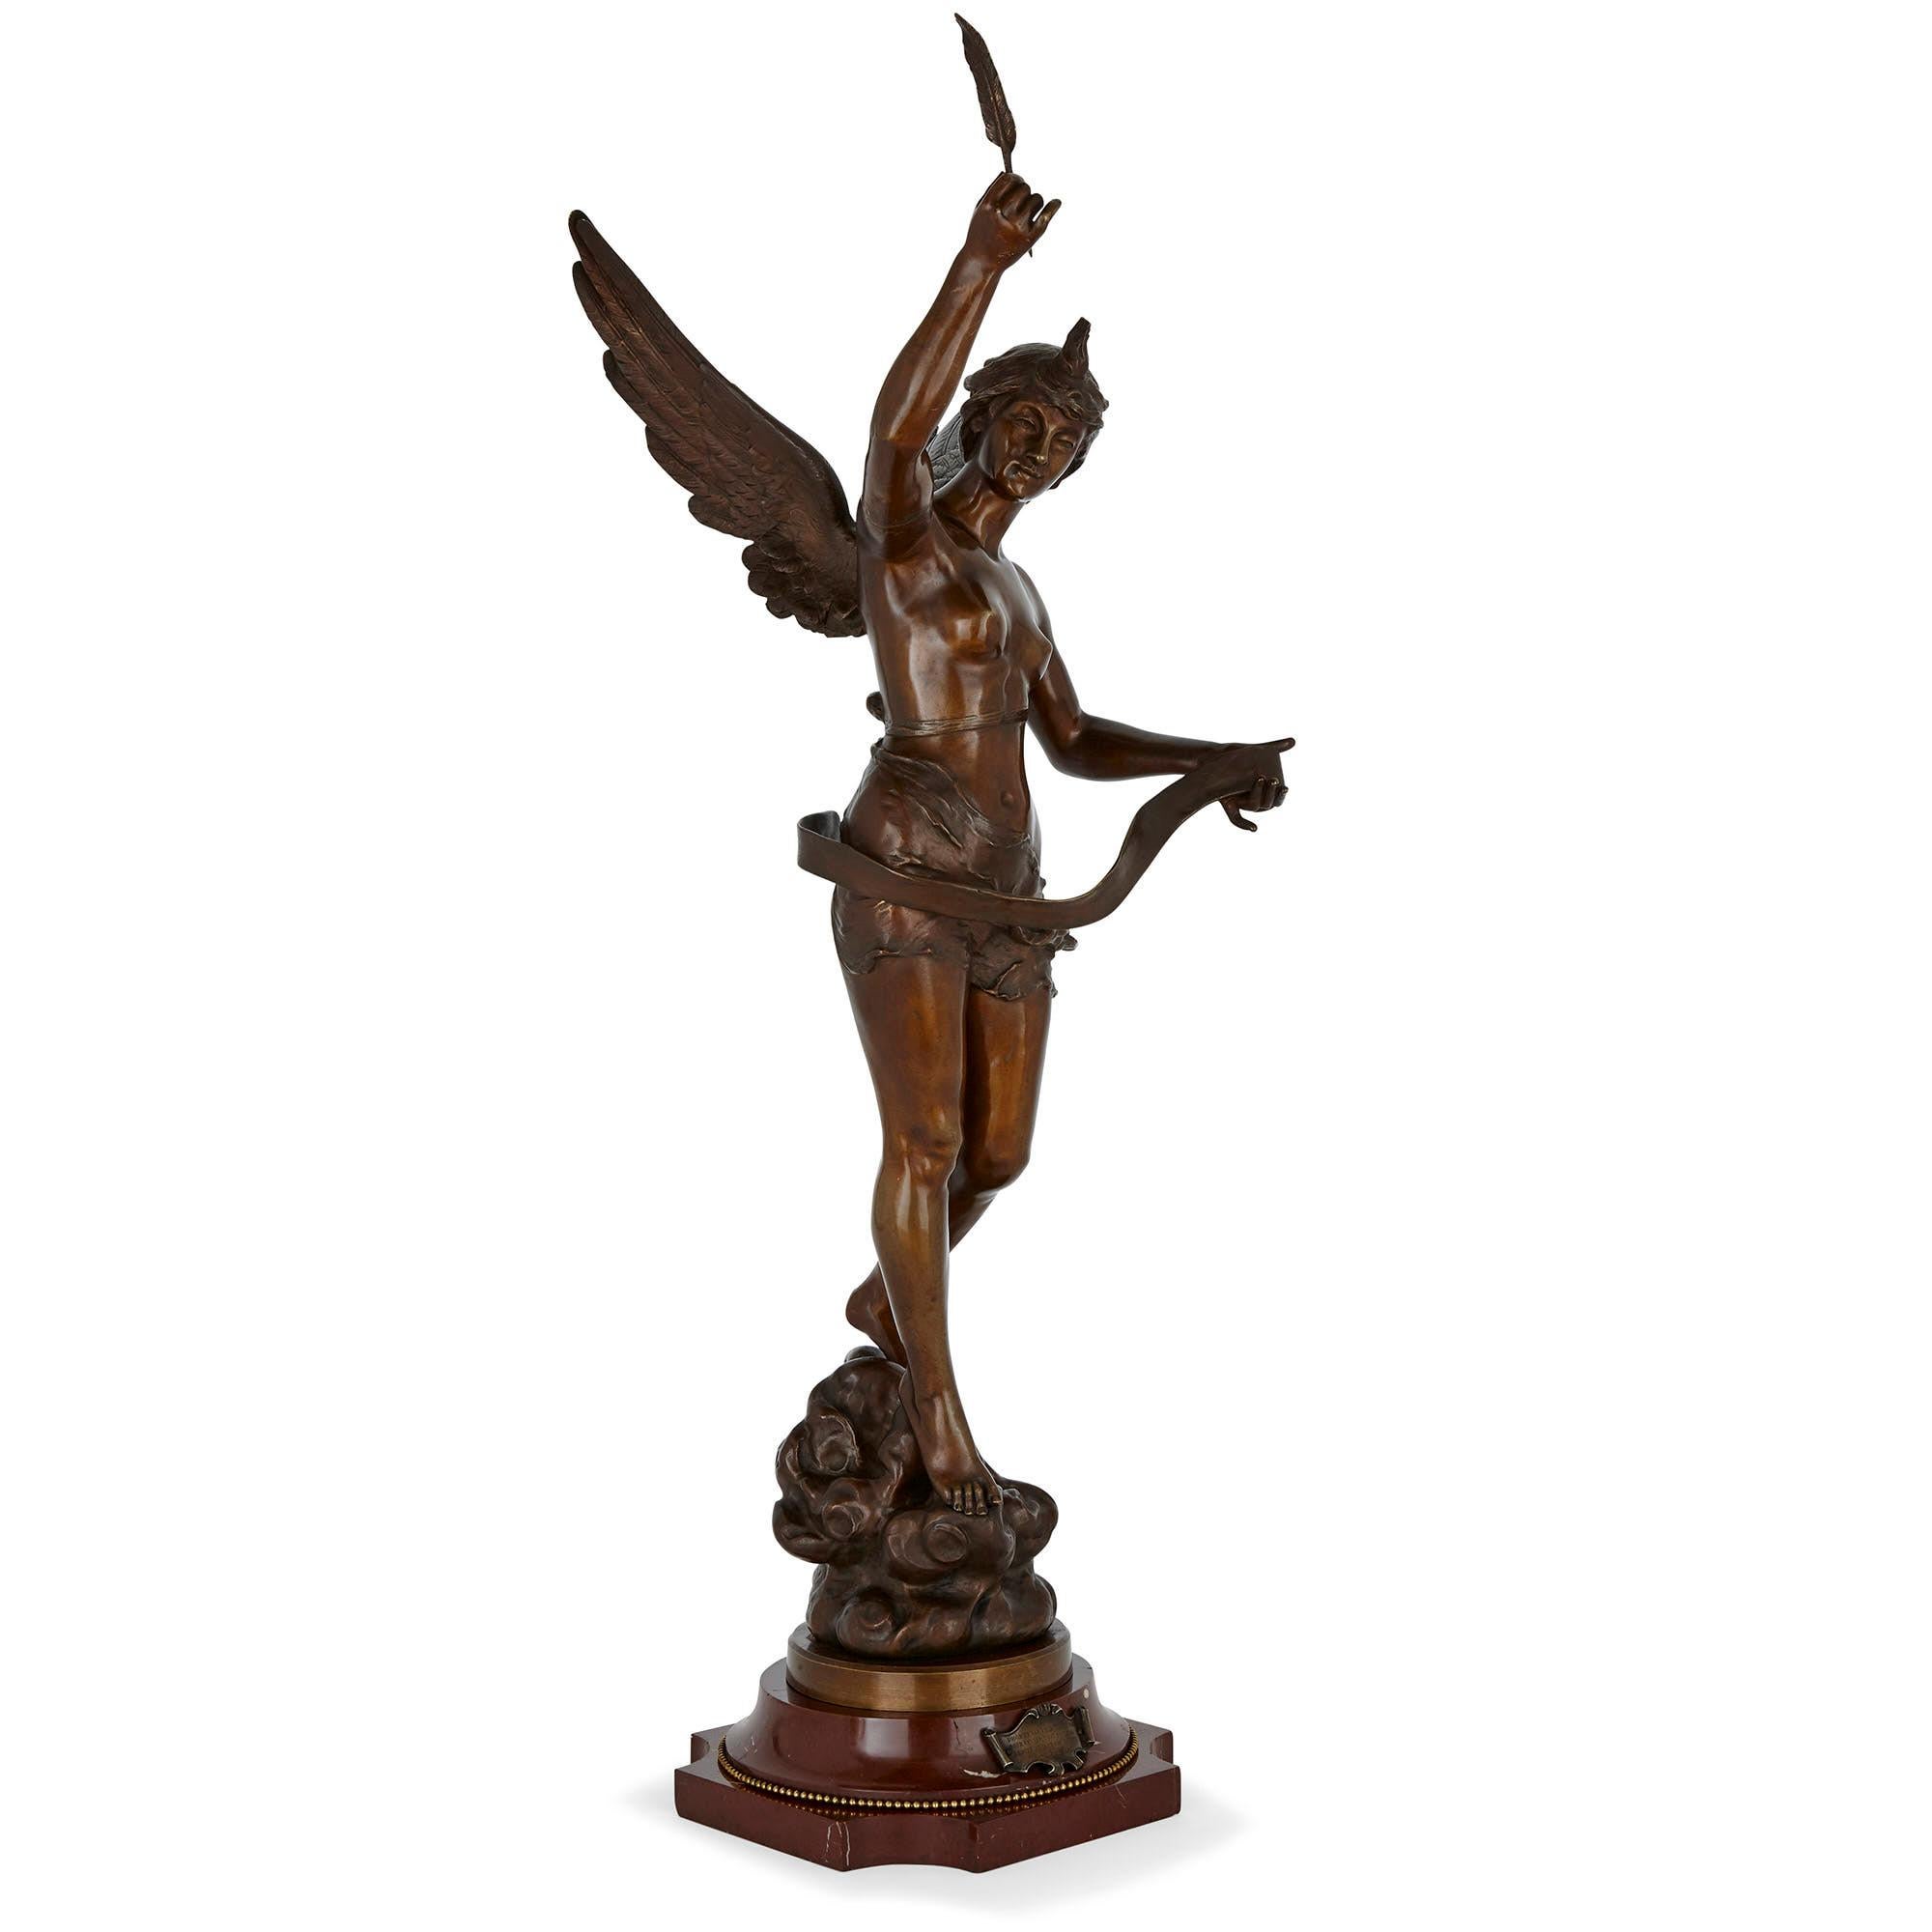 This patinated bronze sculpture, by the French sculptor Ernest Justin Ferrand, features a female winged figure holding a quill pen and an unfurled scroll of paper. She stands naturalistically, her posture in a classical contrapposto, upon a red